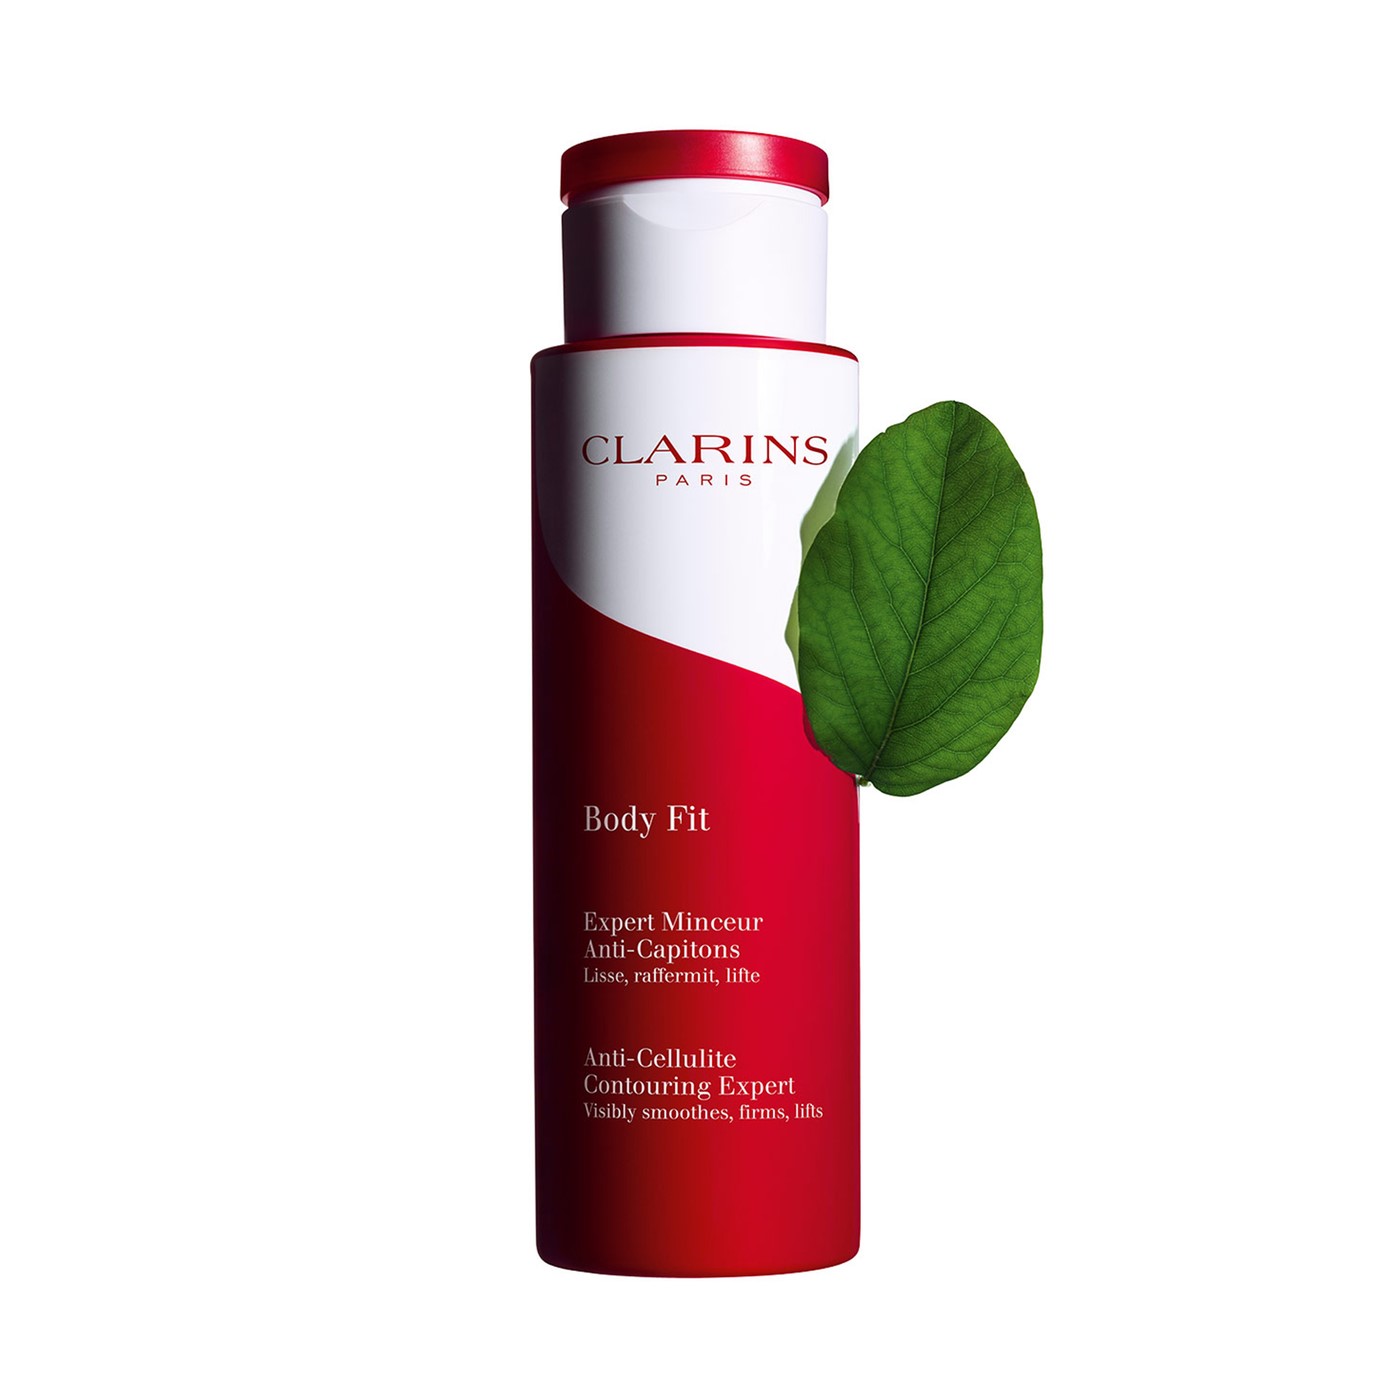 Buy Clarins Body Fit Anti-Cellulite Contouring Expert 200ml · Seychelles